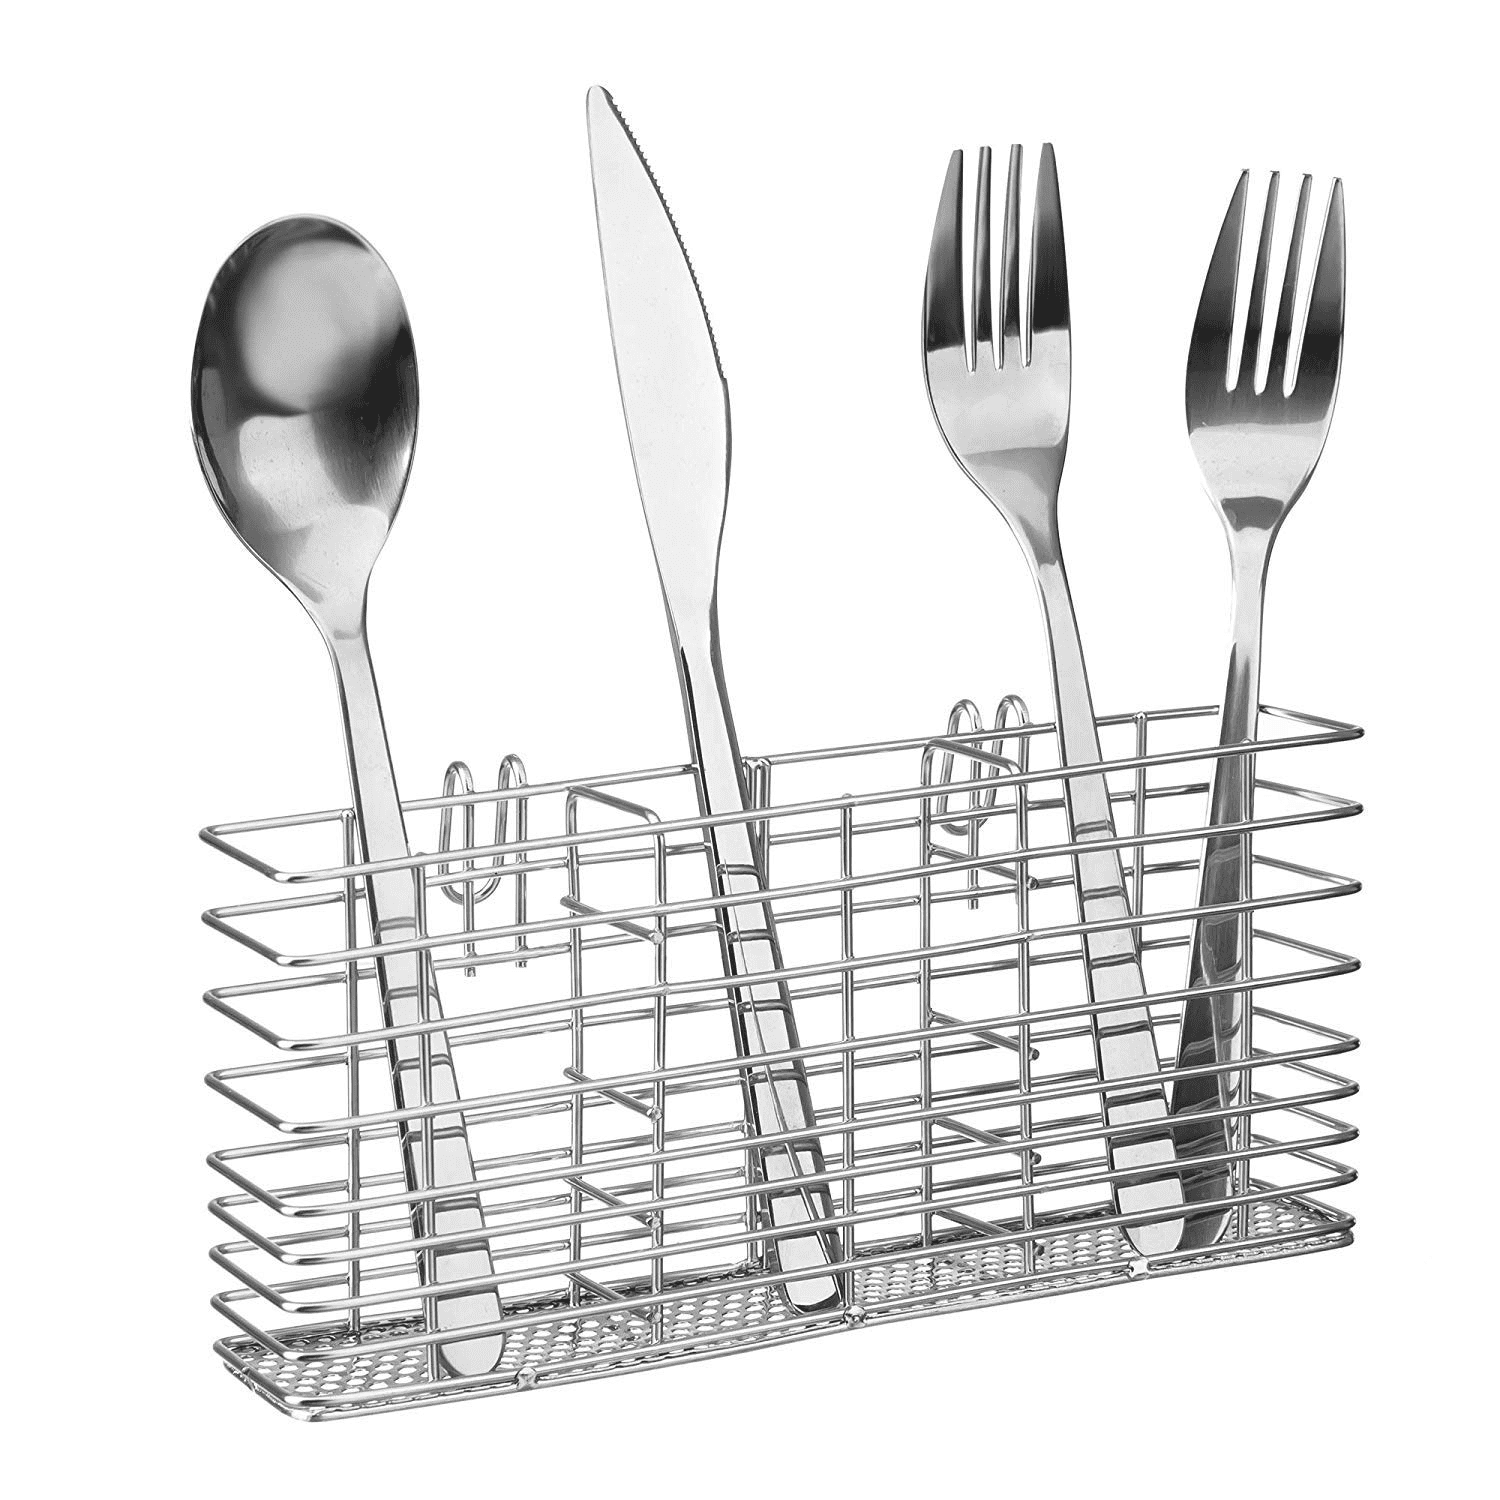 kaileyouxiangongsi Utensil Drying Rack/Chopsticks/Spoon/Fork/Knife Drainer  Basket Flatware Storage Drainer,2 Divided Compartments, Sturdy 304